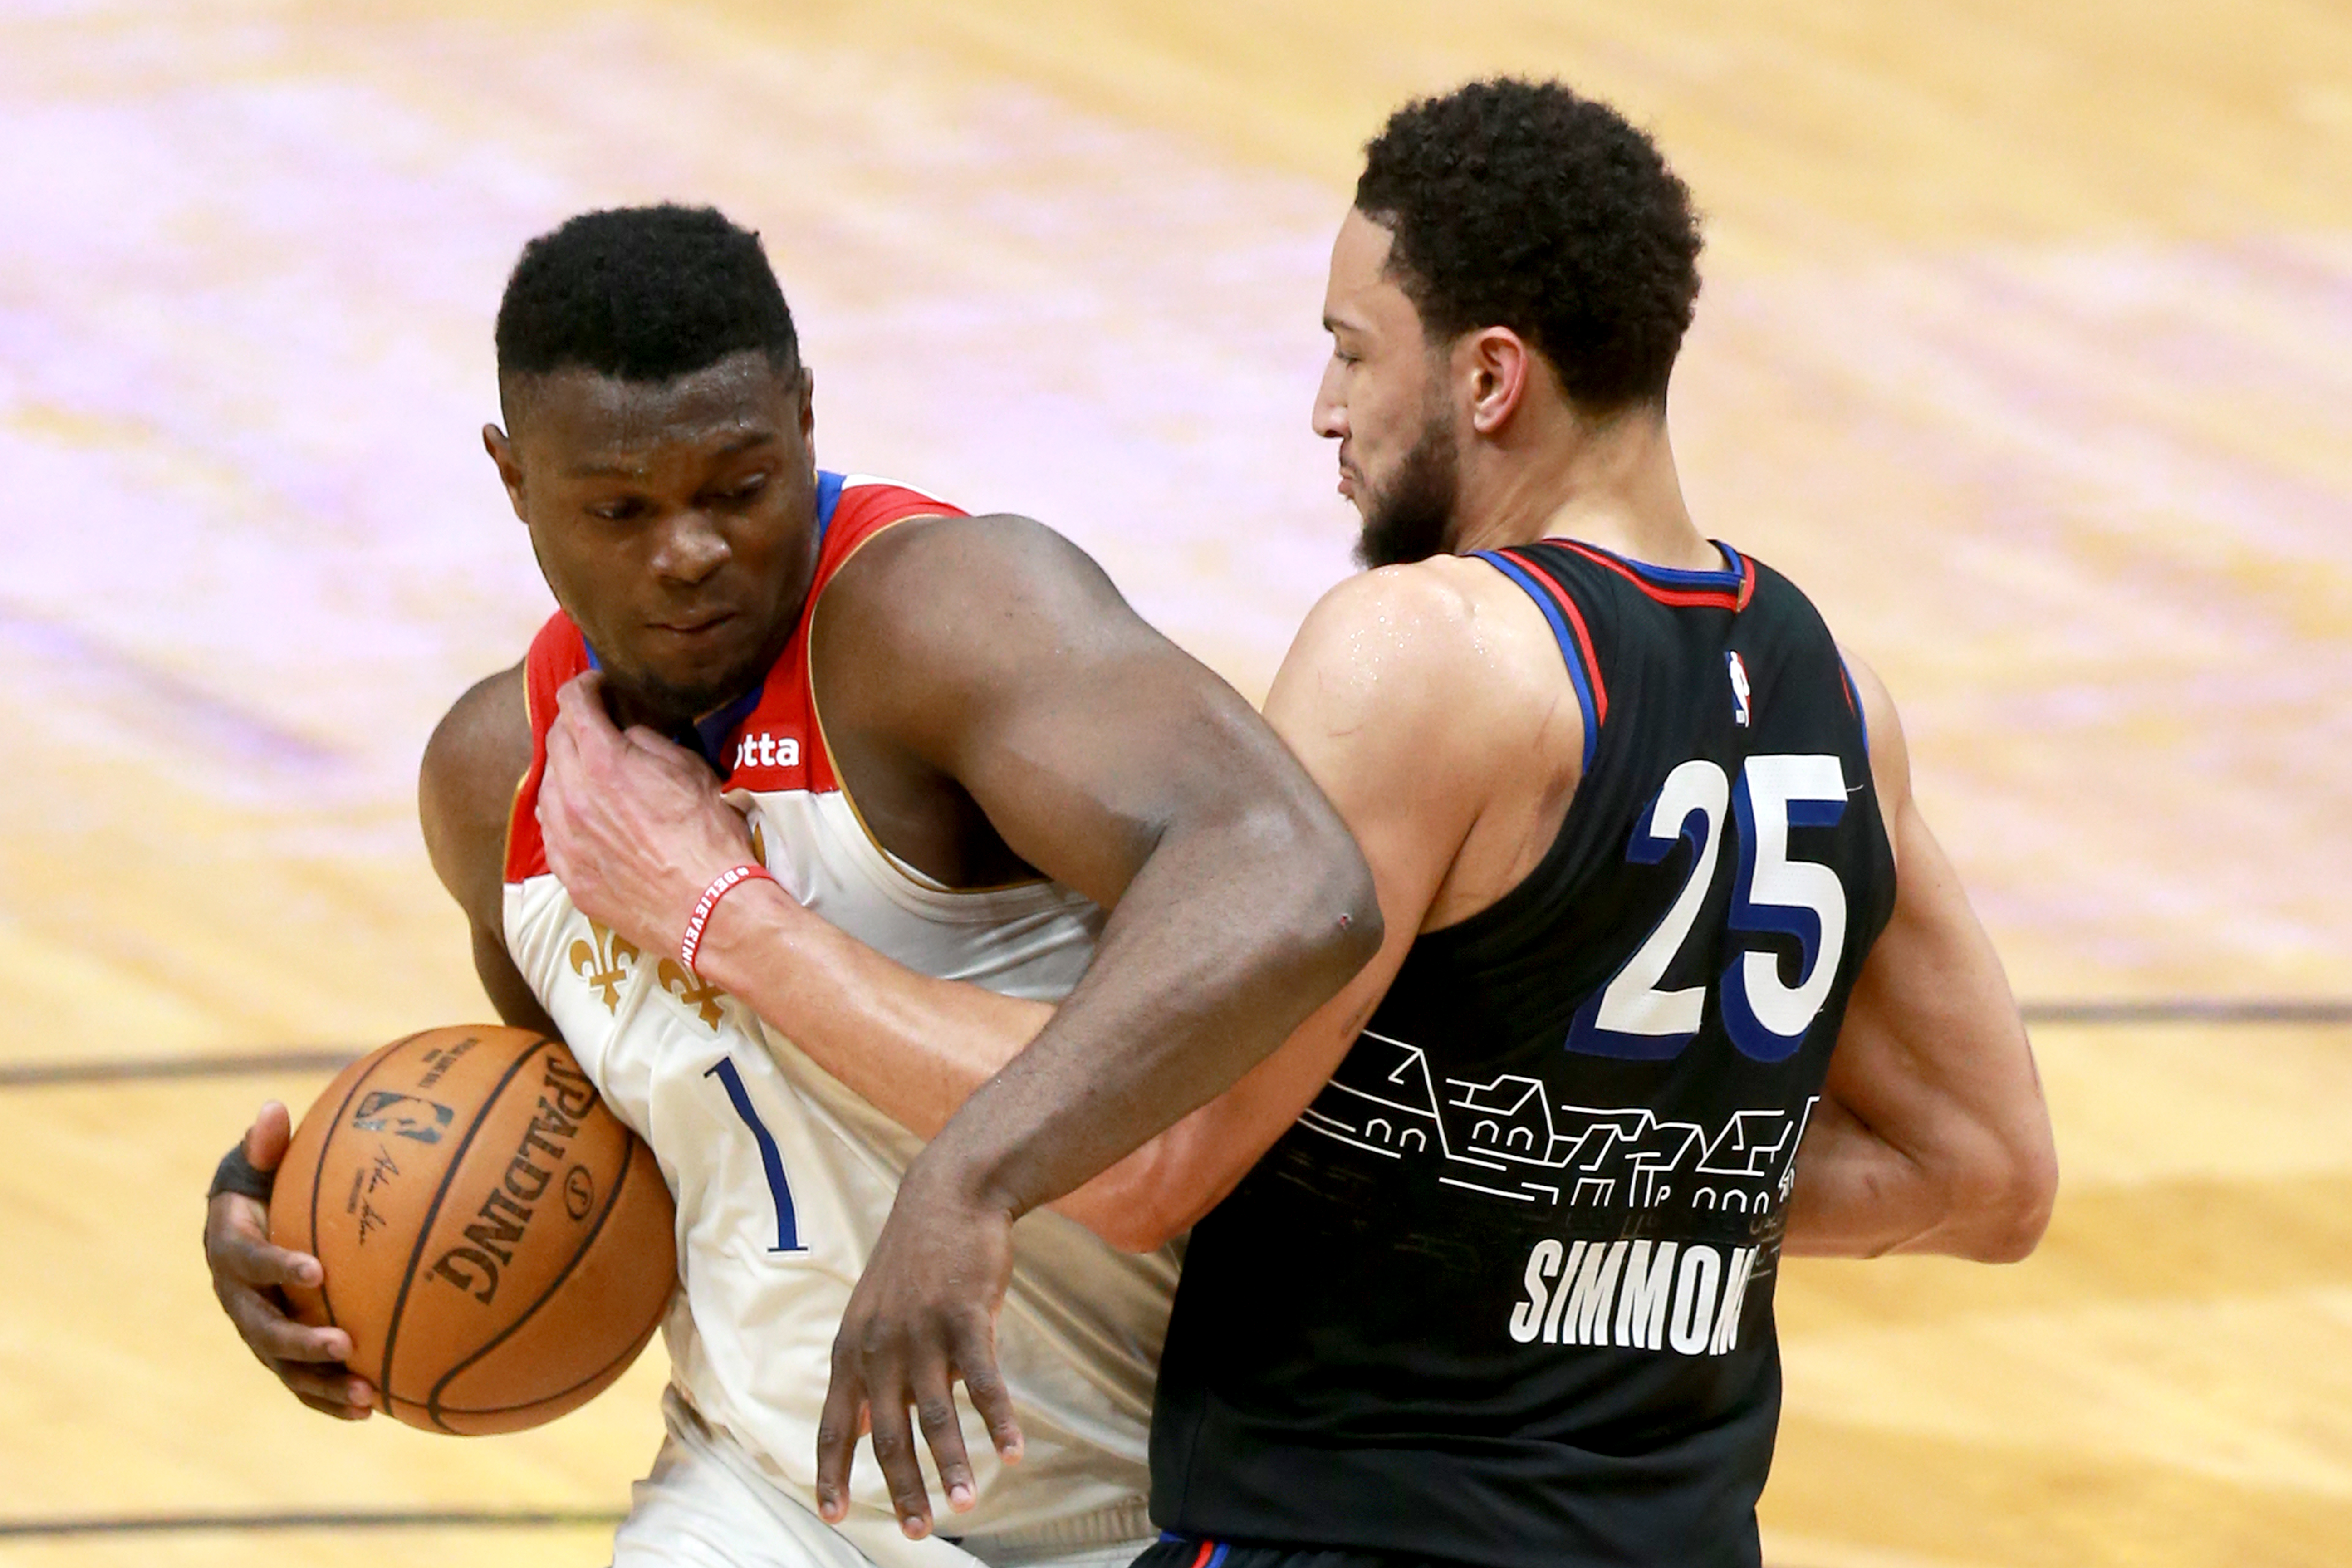 Zion Williamson of the New Orleans Pelicans is defended by Ben Simmons of the Philadelphia 76ers during the third quarter of an NBA game at Smoothie King Center on April 09, 2021 in New Orleans, Louisiana.